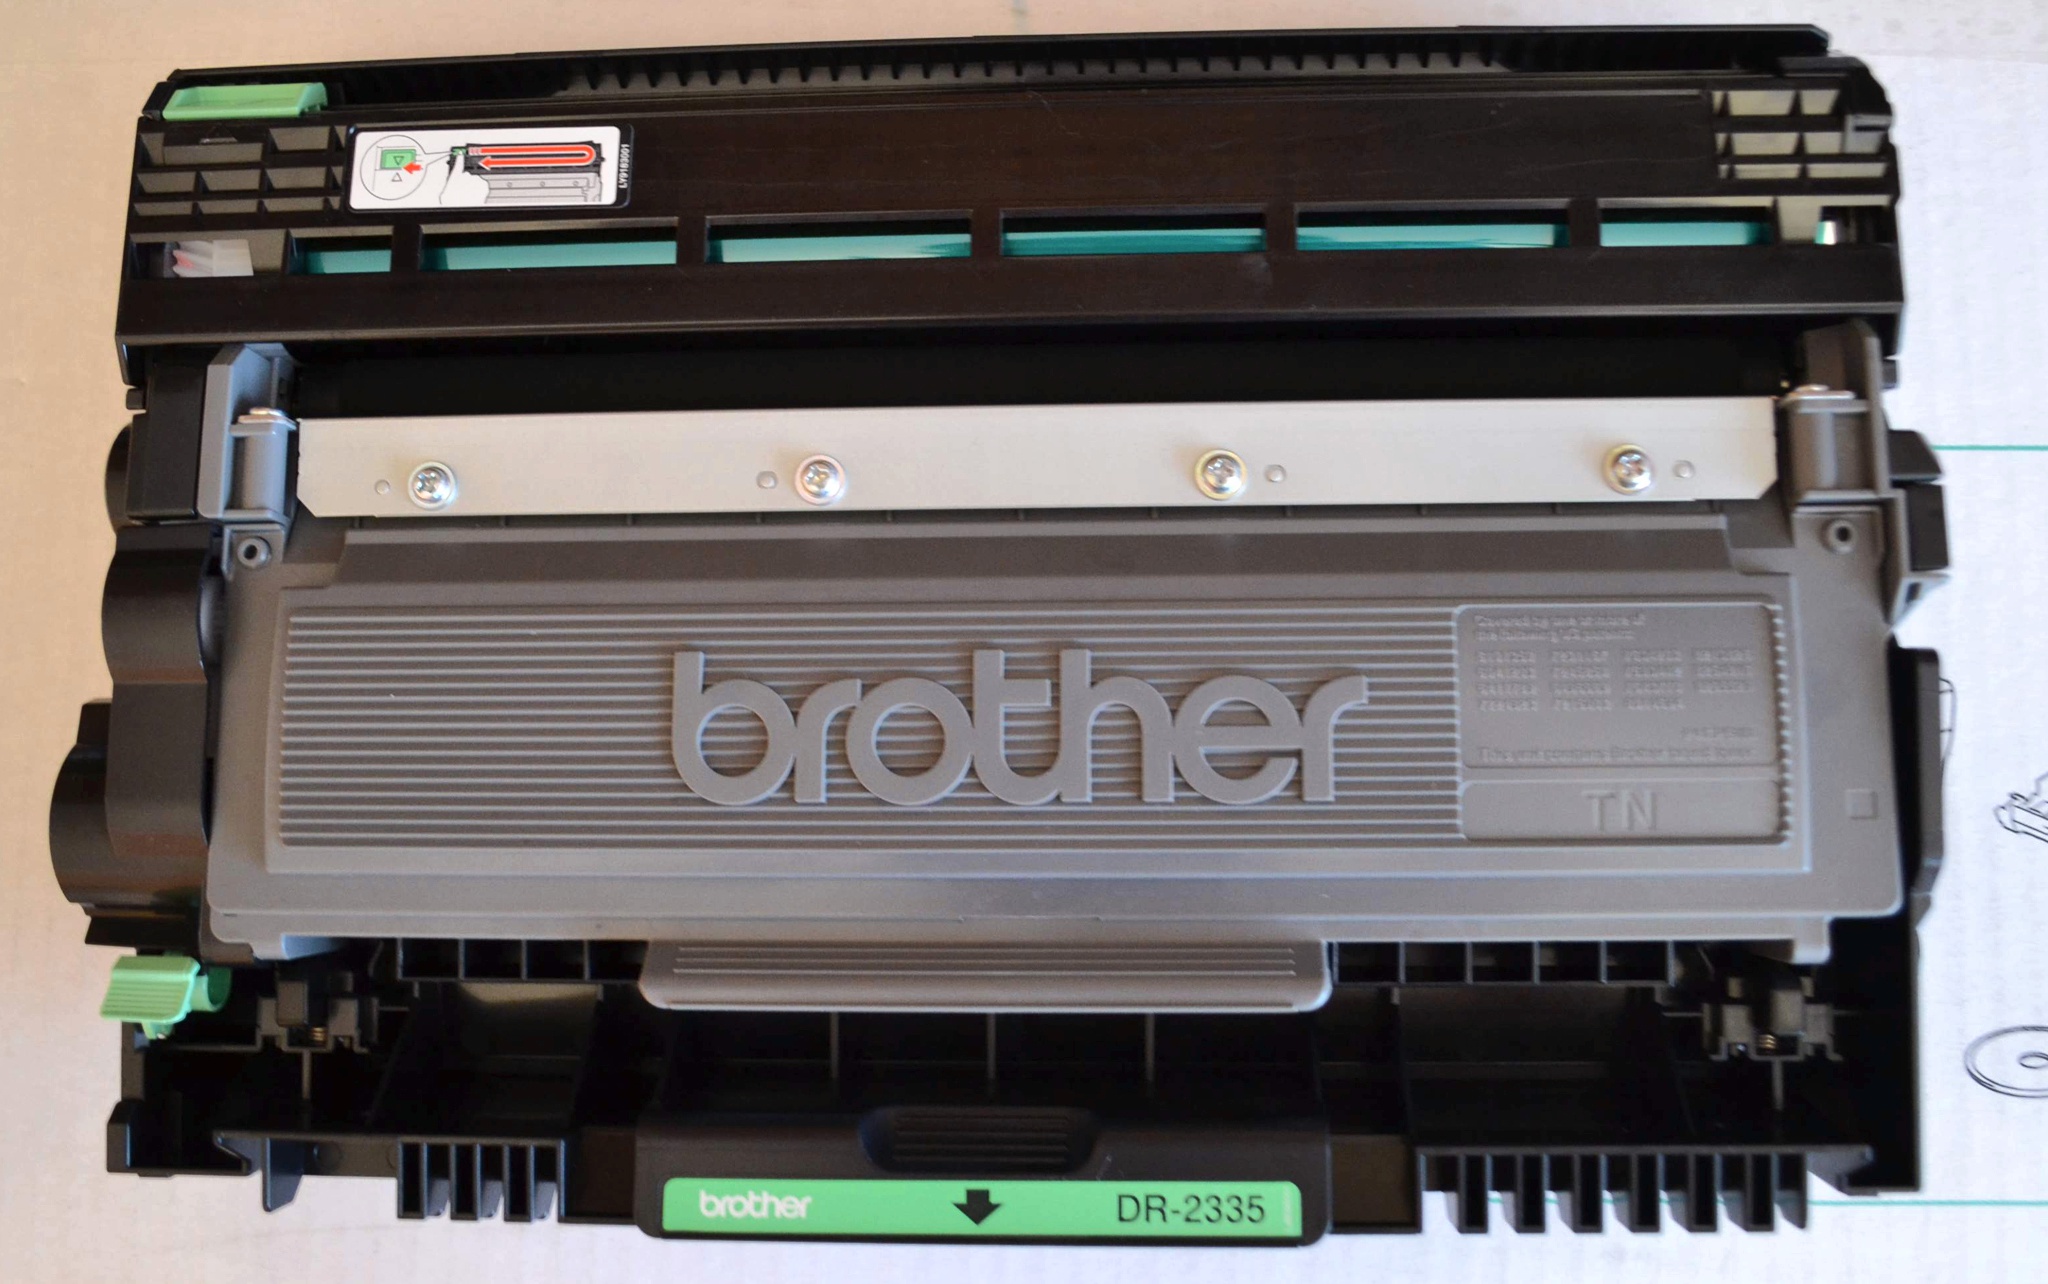 Brother dcp 2500dr. Принтер brother DCP l2500dr. Brother DCP-l2500. Brother DCP-l2500dr. Brother DCP 2500 картридж.